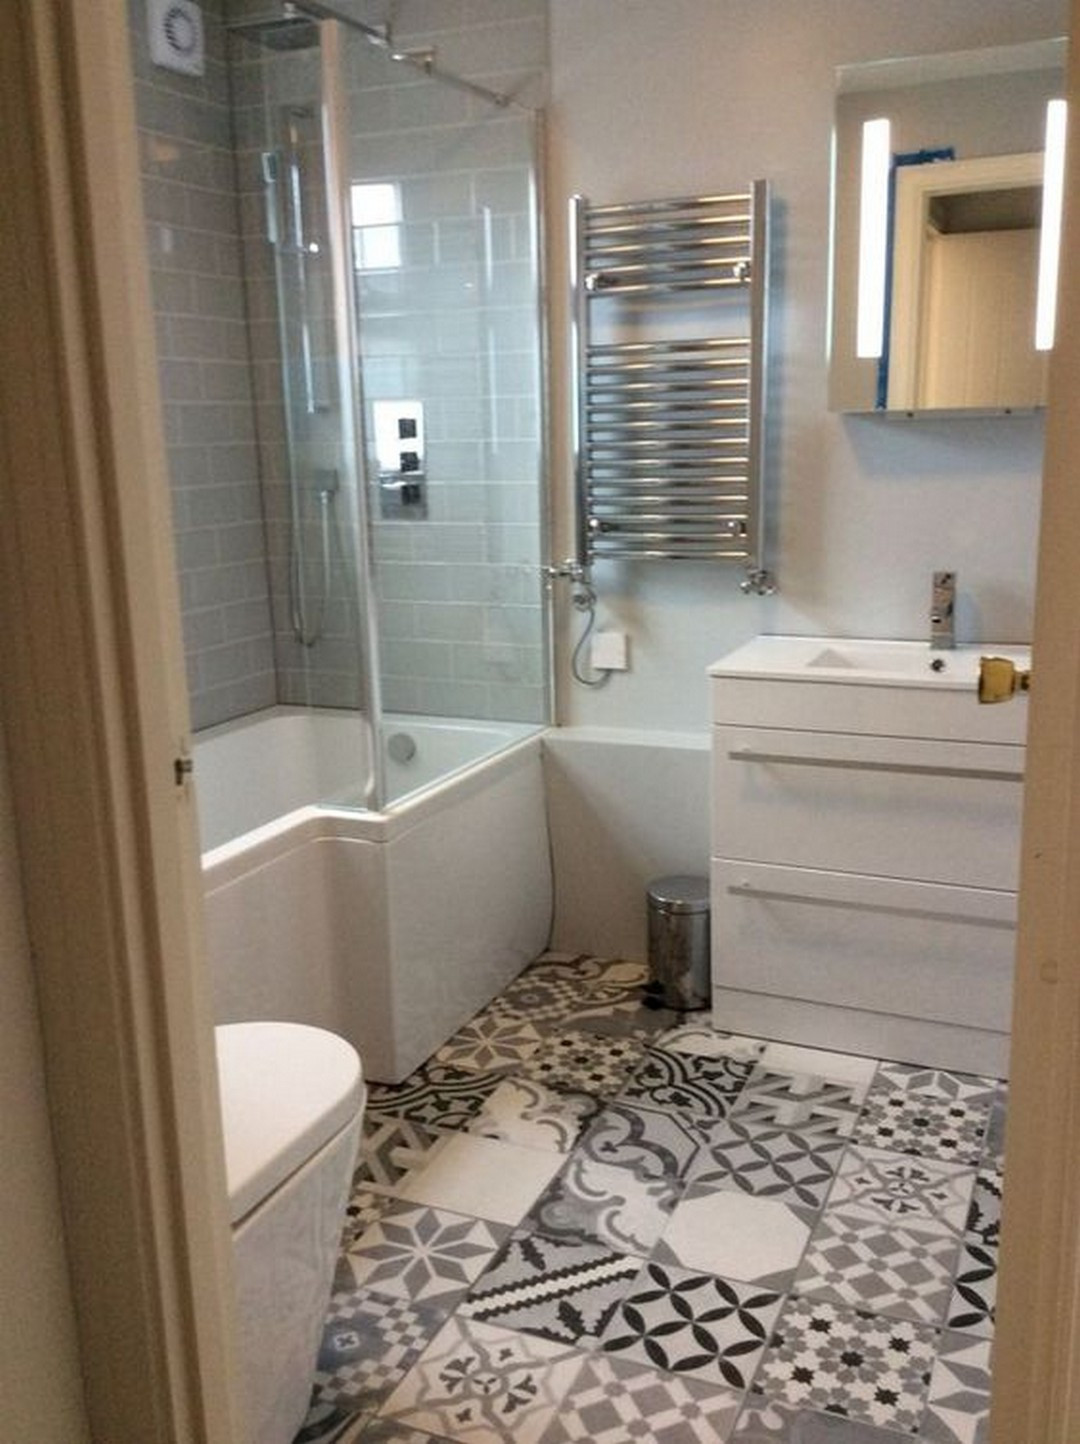 Bathroom Floor Tile Designs
 Style up your Ordinary Bathroom with These Spanish Tile